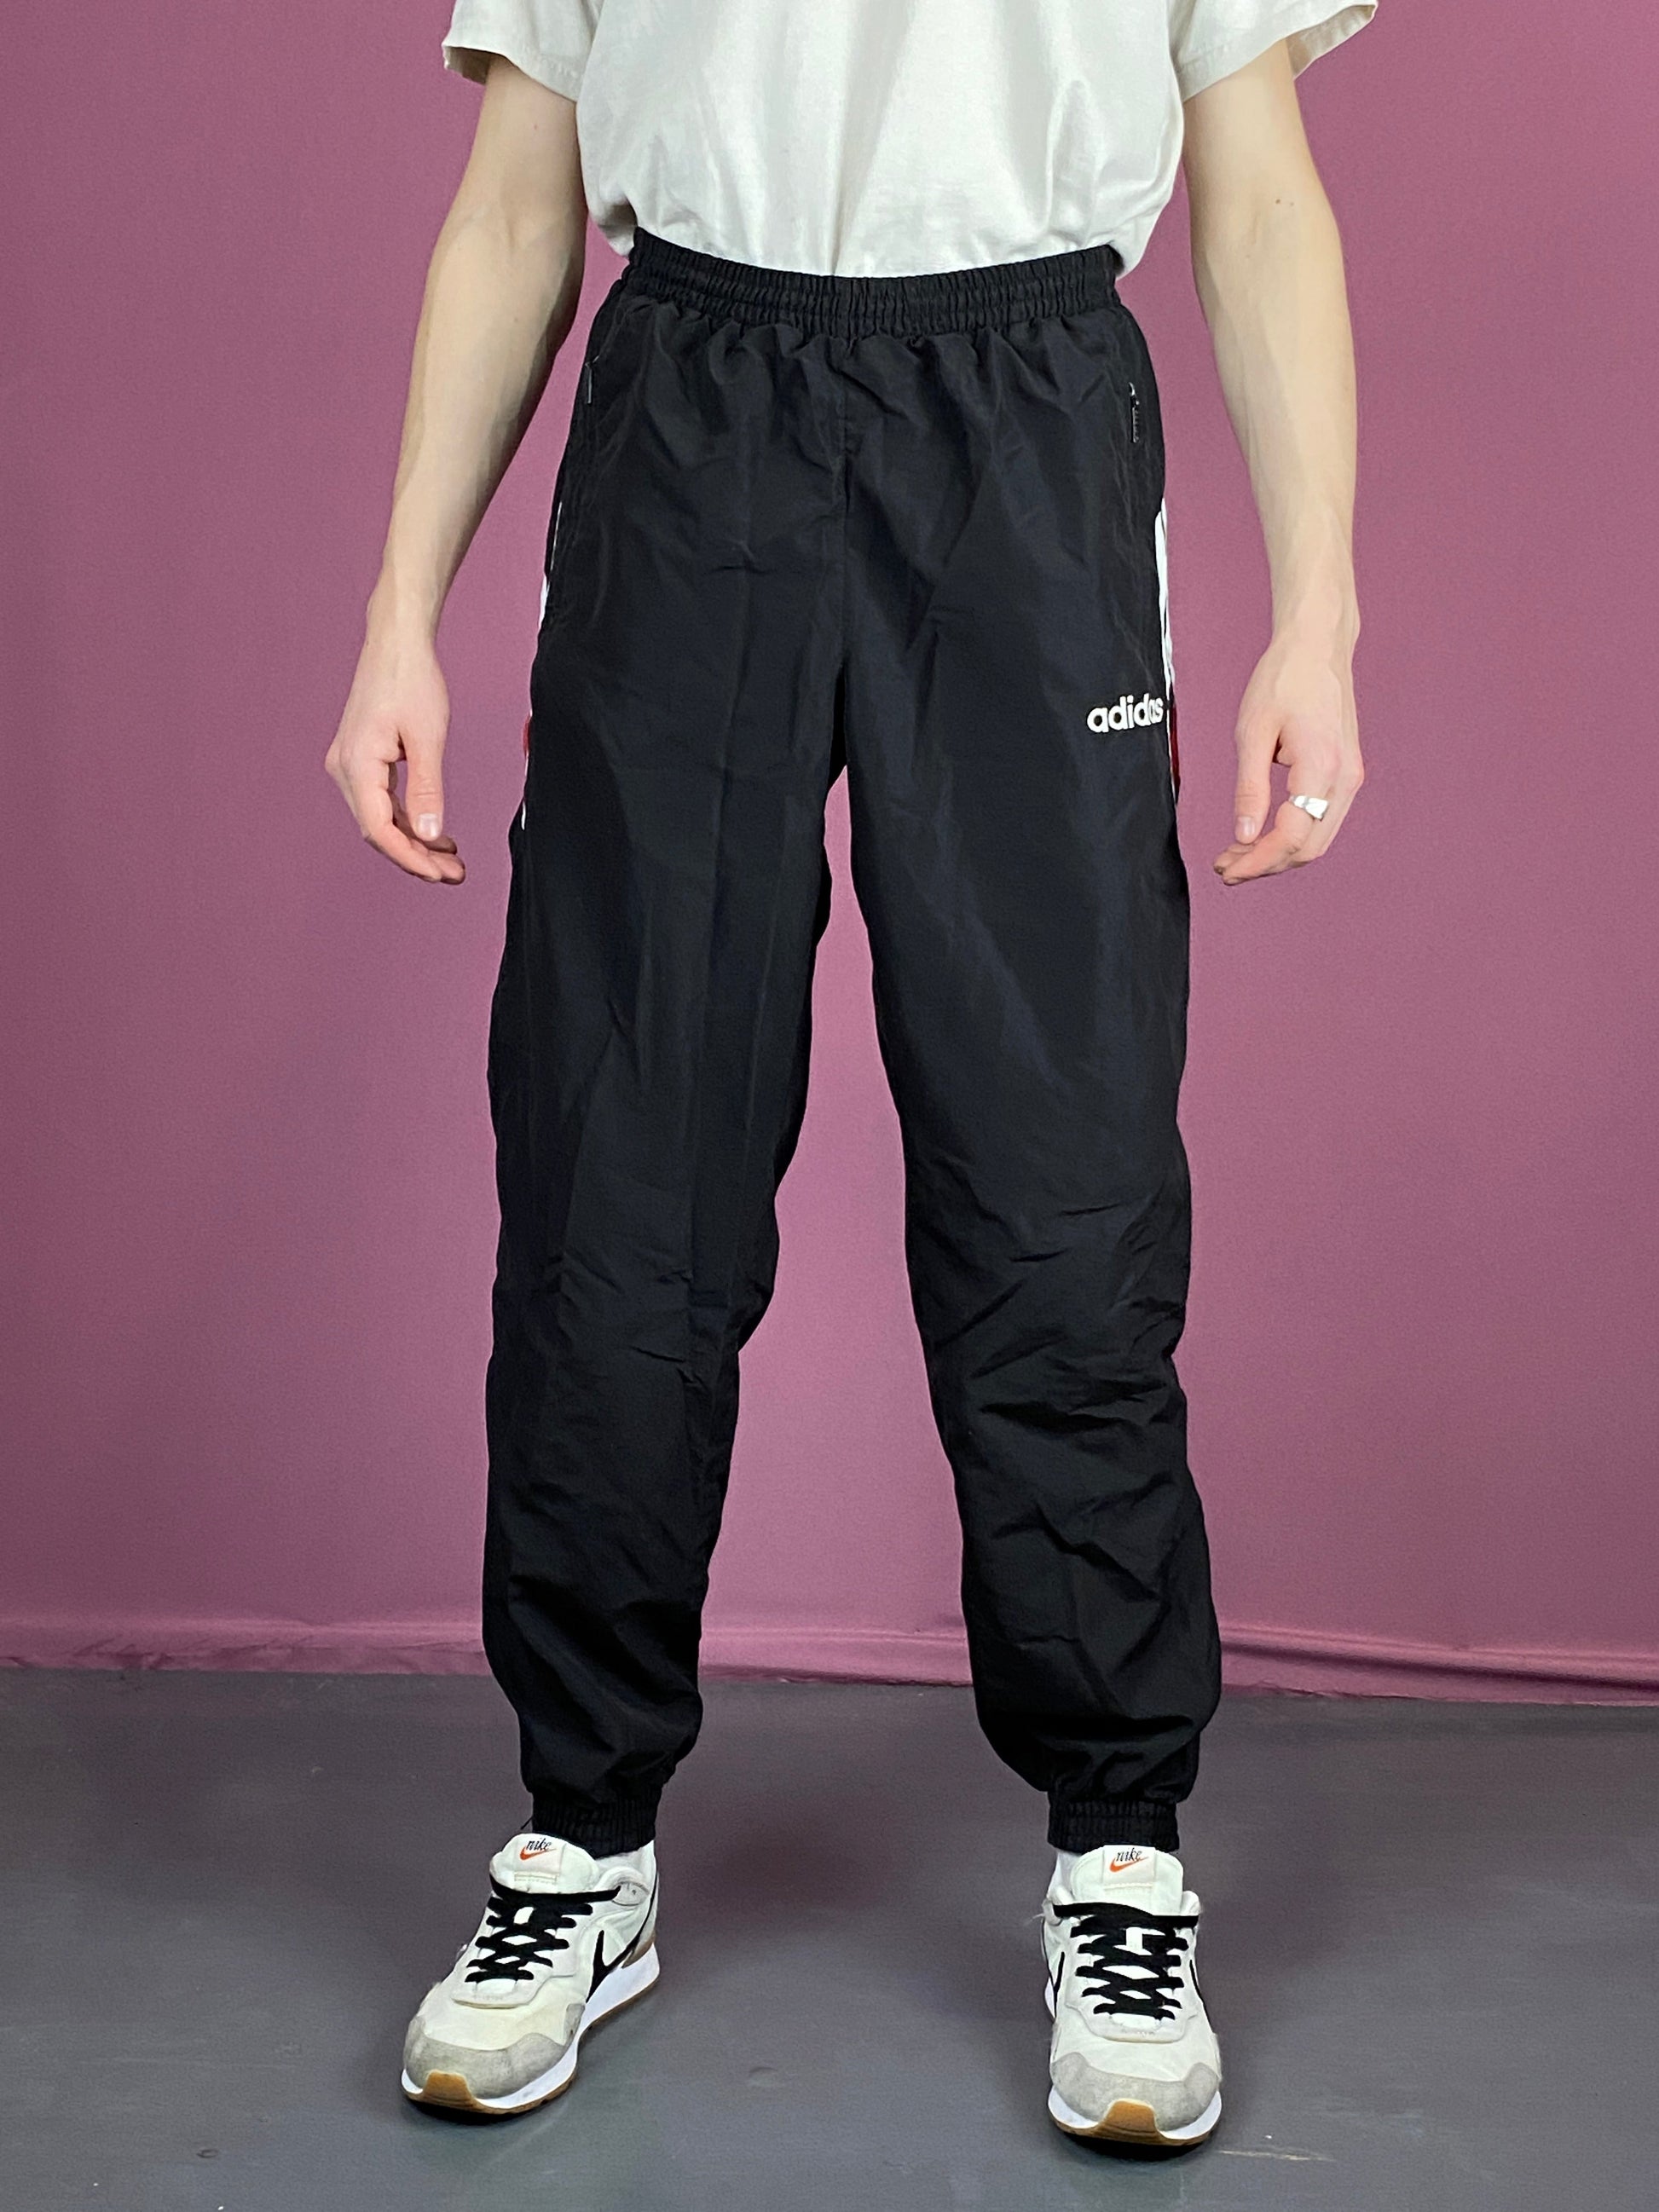 90s Adidas Vintage Men's Joggers - Small Black Polyester